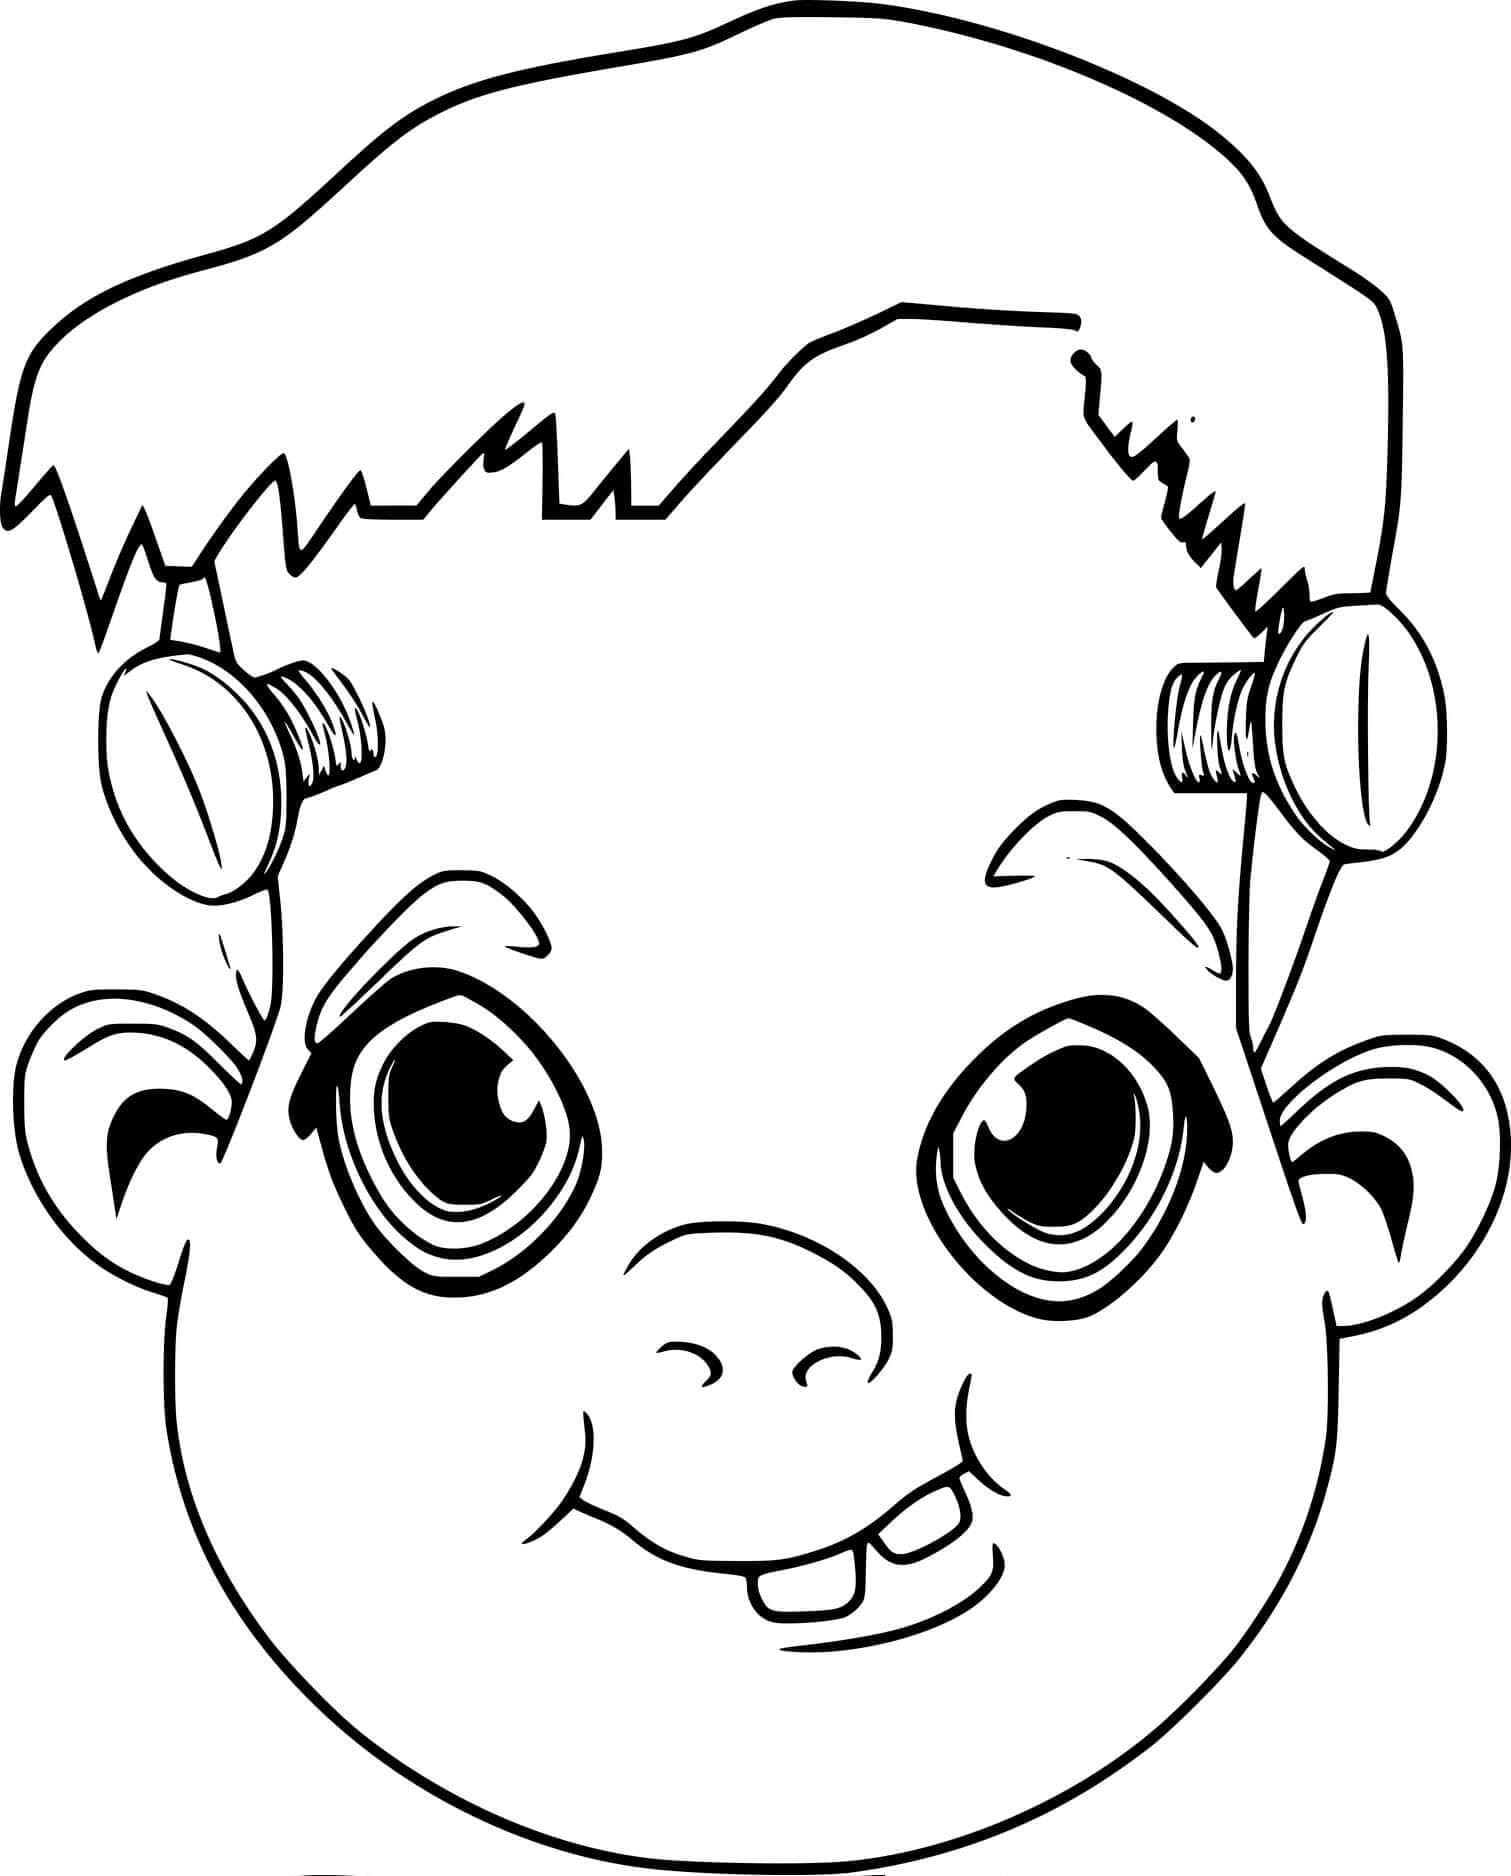 Baby Frankenstein coloring page - Download, Print or Color Online for Free